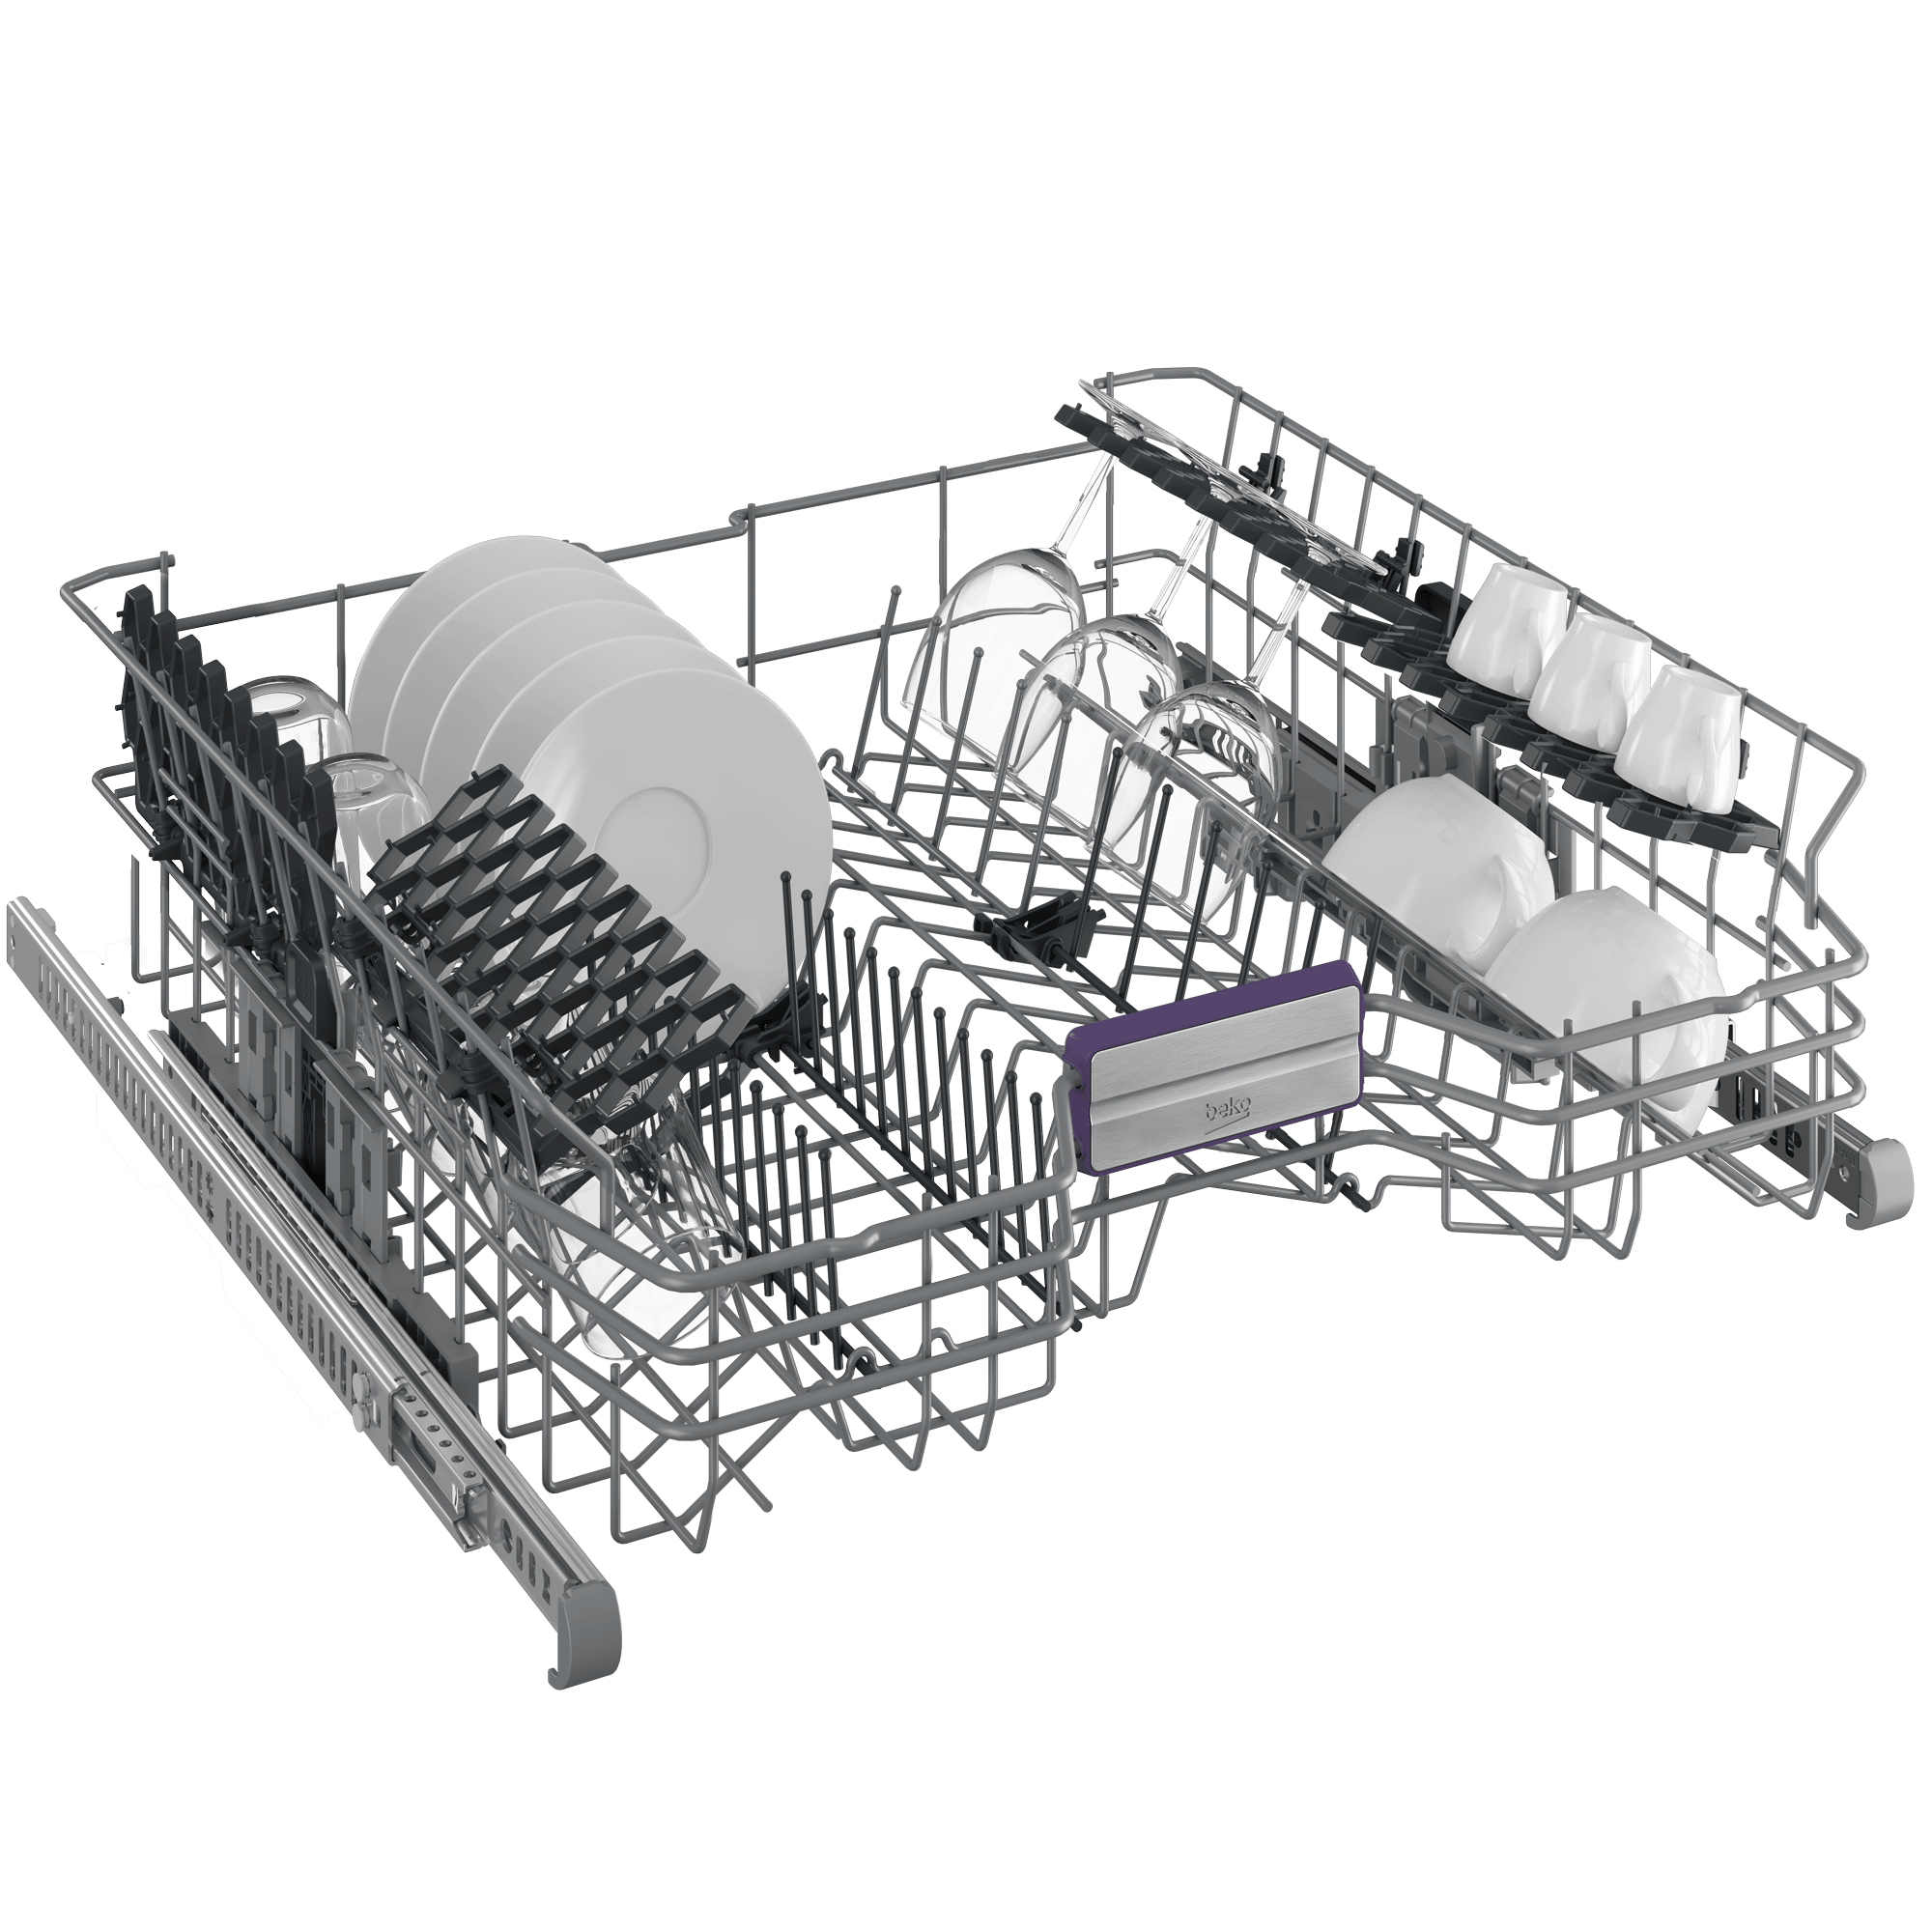 Beko DDT38532XIHHW Dishwasher With (16 Place Settings,45)